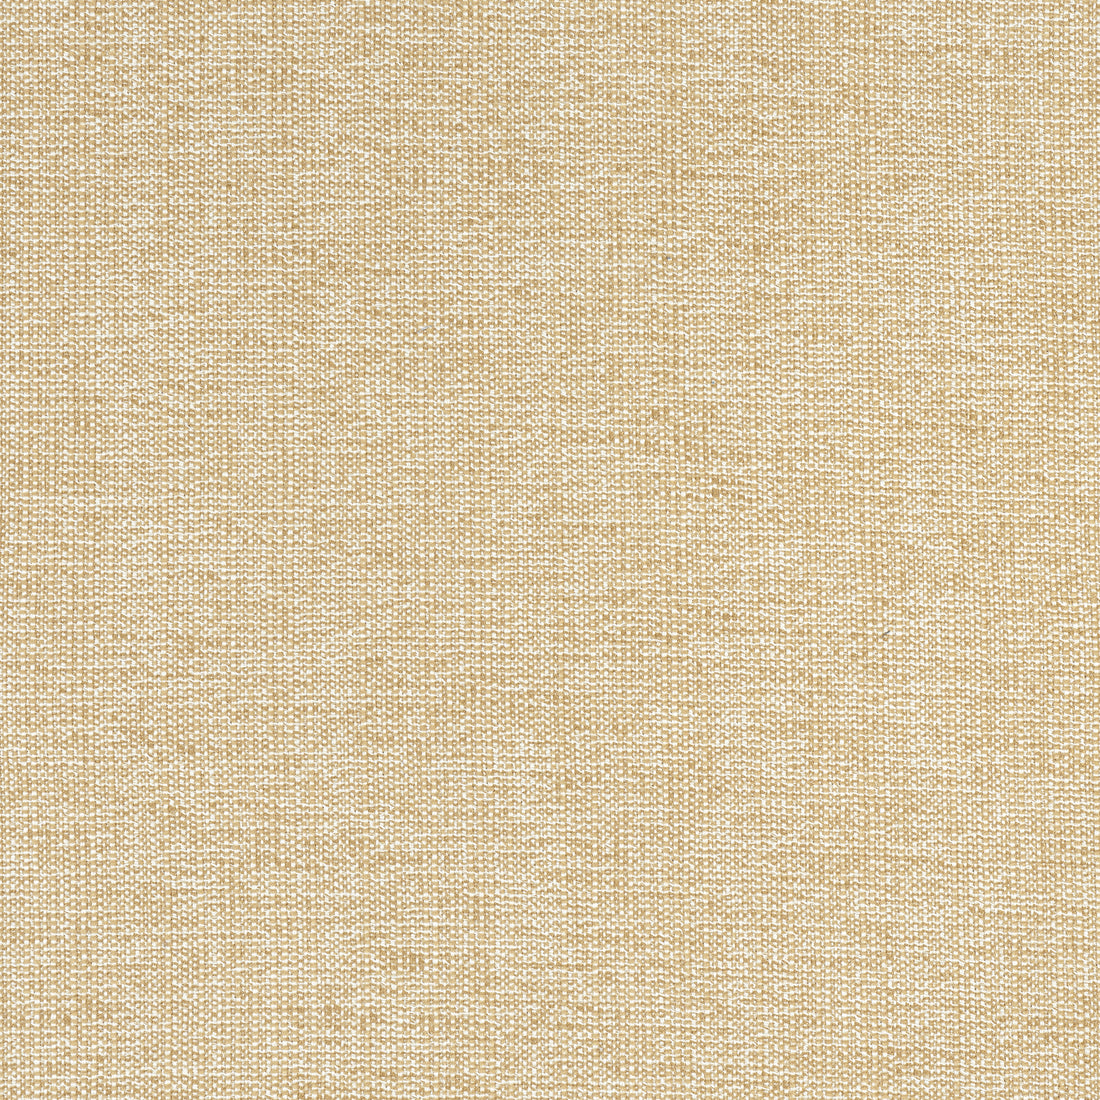 Sacchi fabric in caramel color - pattern number W8756 - by Thibaut in the Haven Textures collection